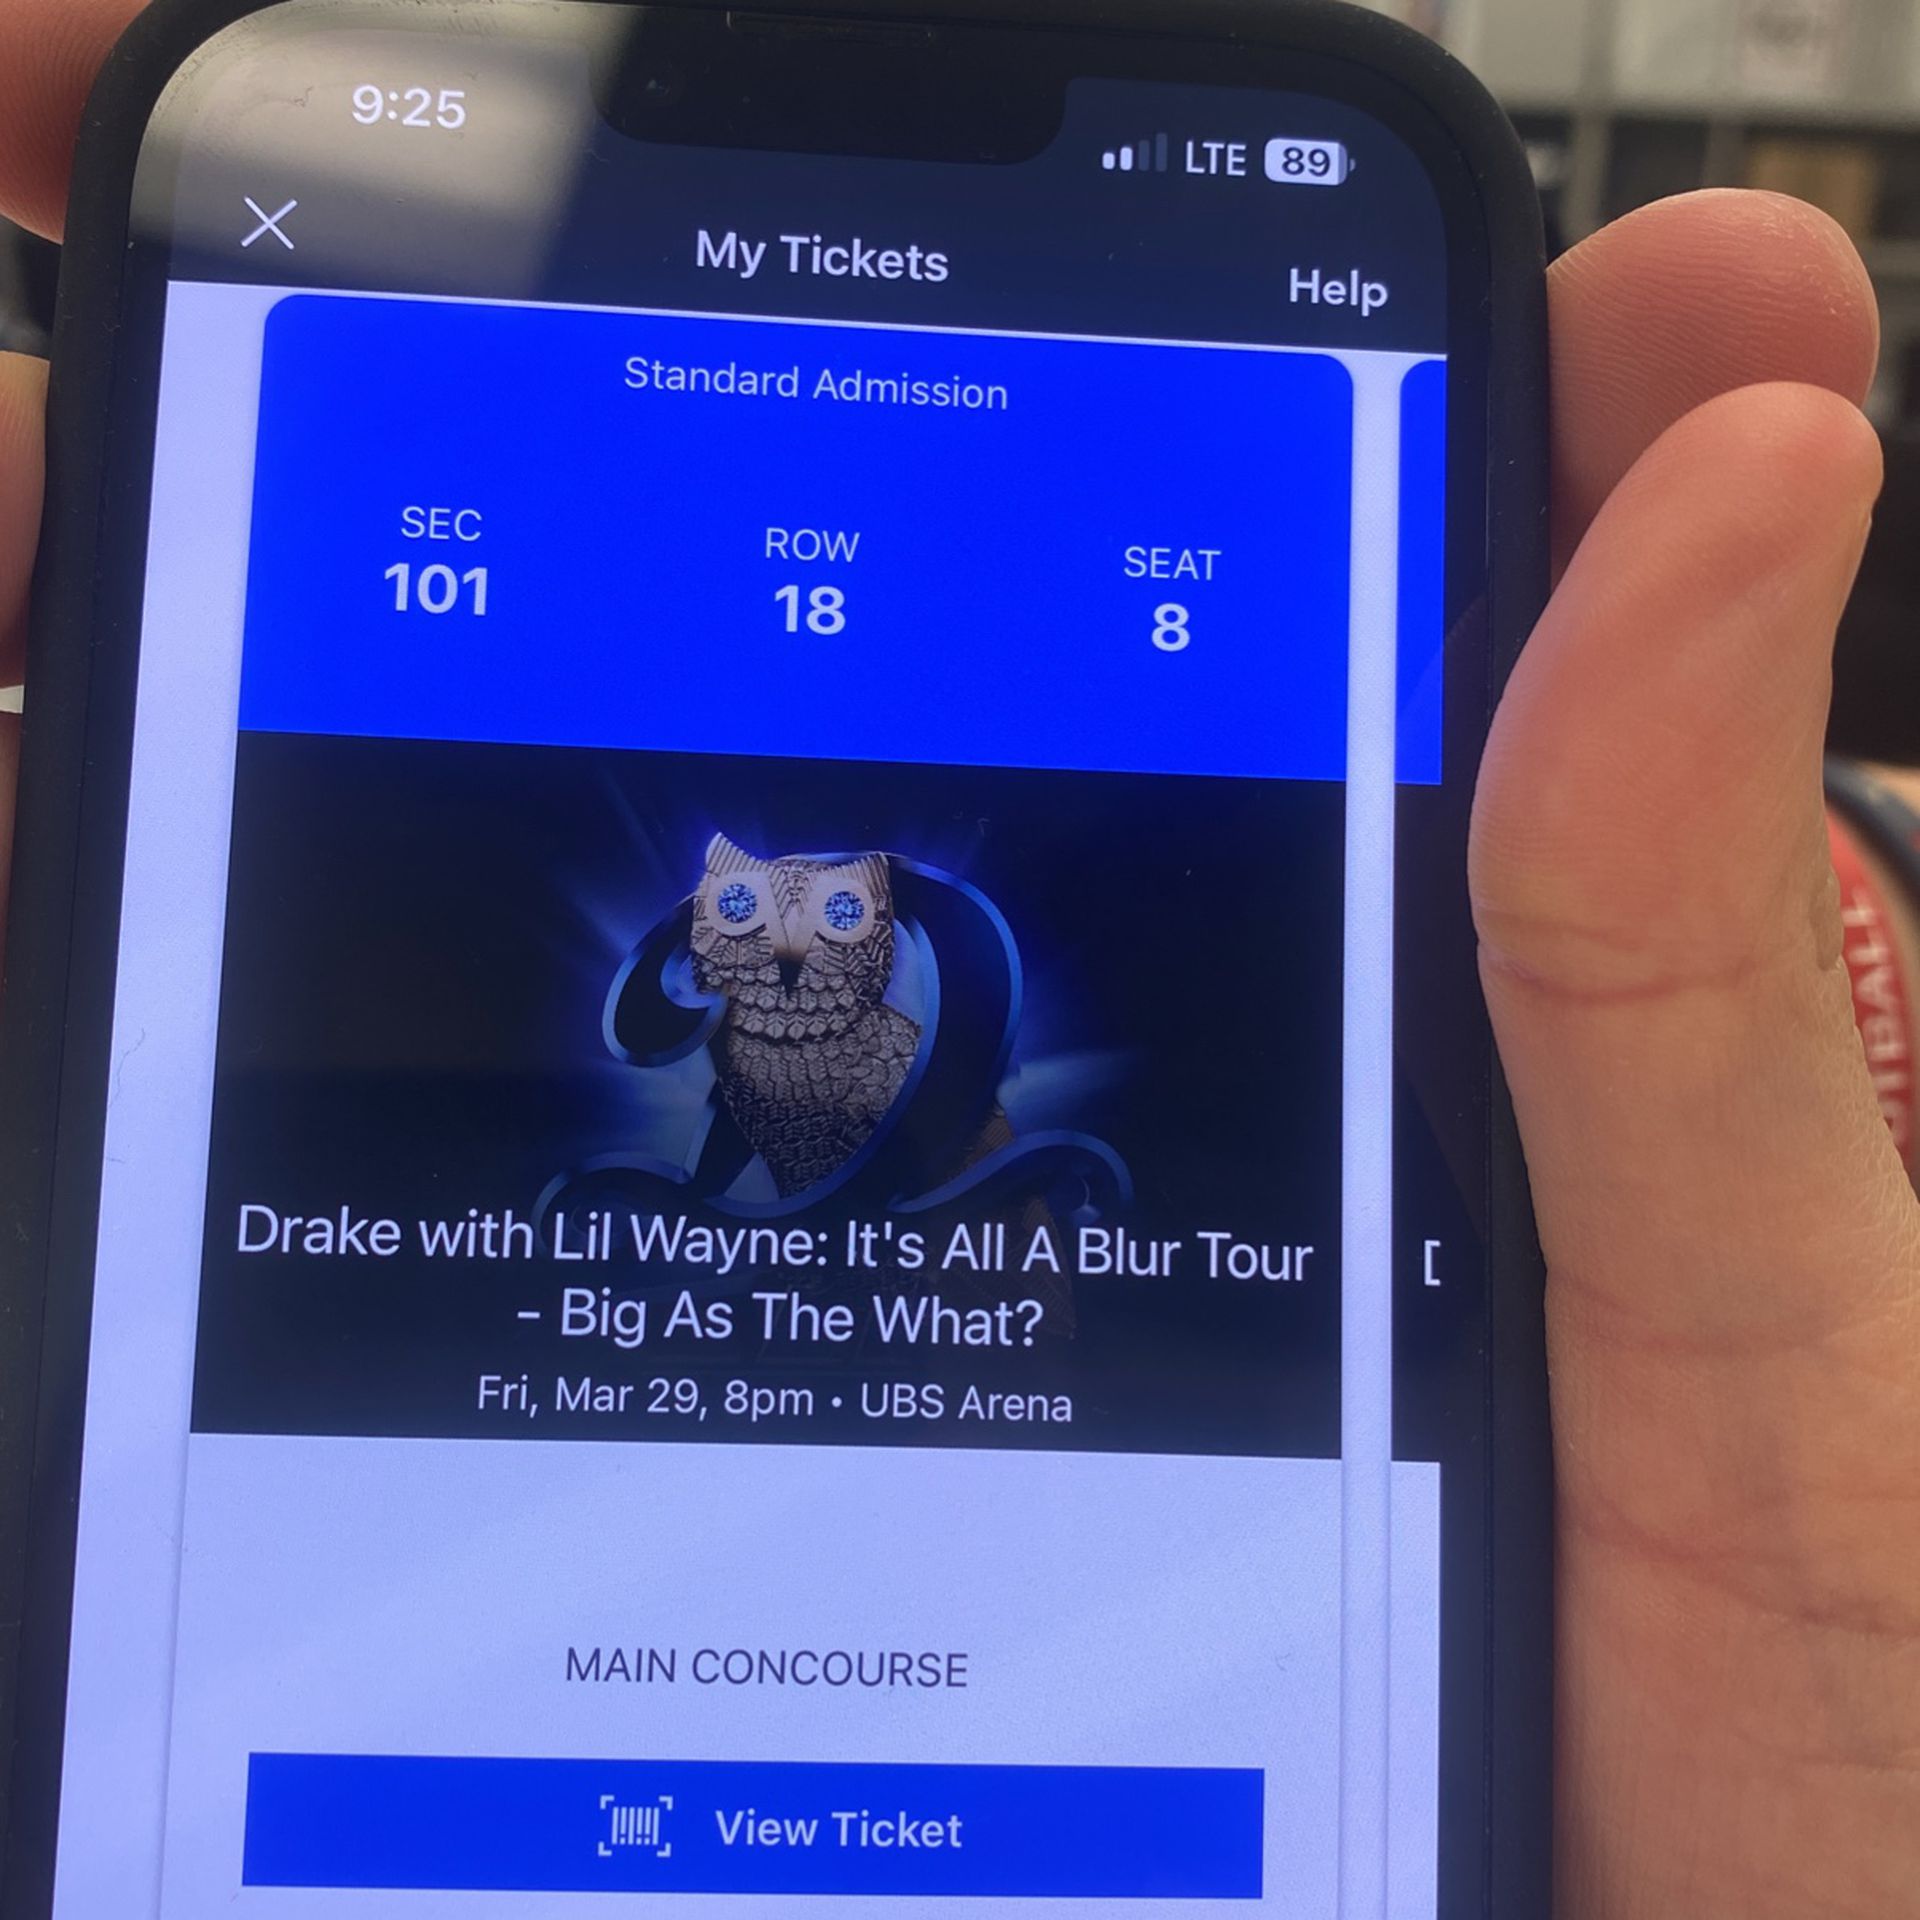 Drake With Lil Wayne It’s All A Blur Tour - Big As The What ? Friday Mar 29 8 Pm UBS Arena  Sec 101 Row 18 Seat 8&9